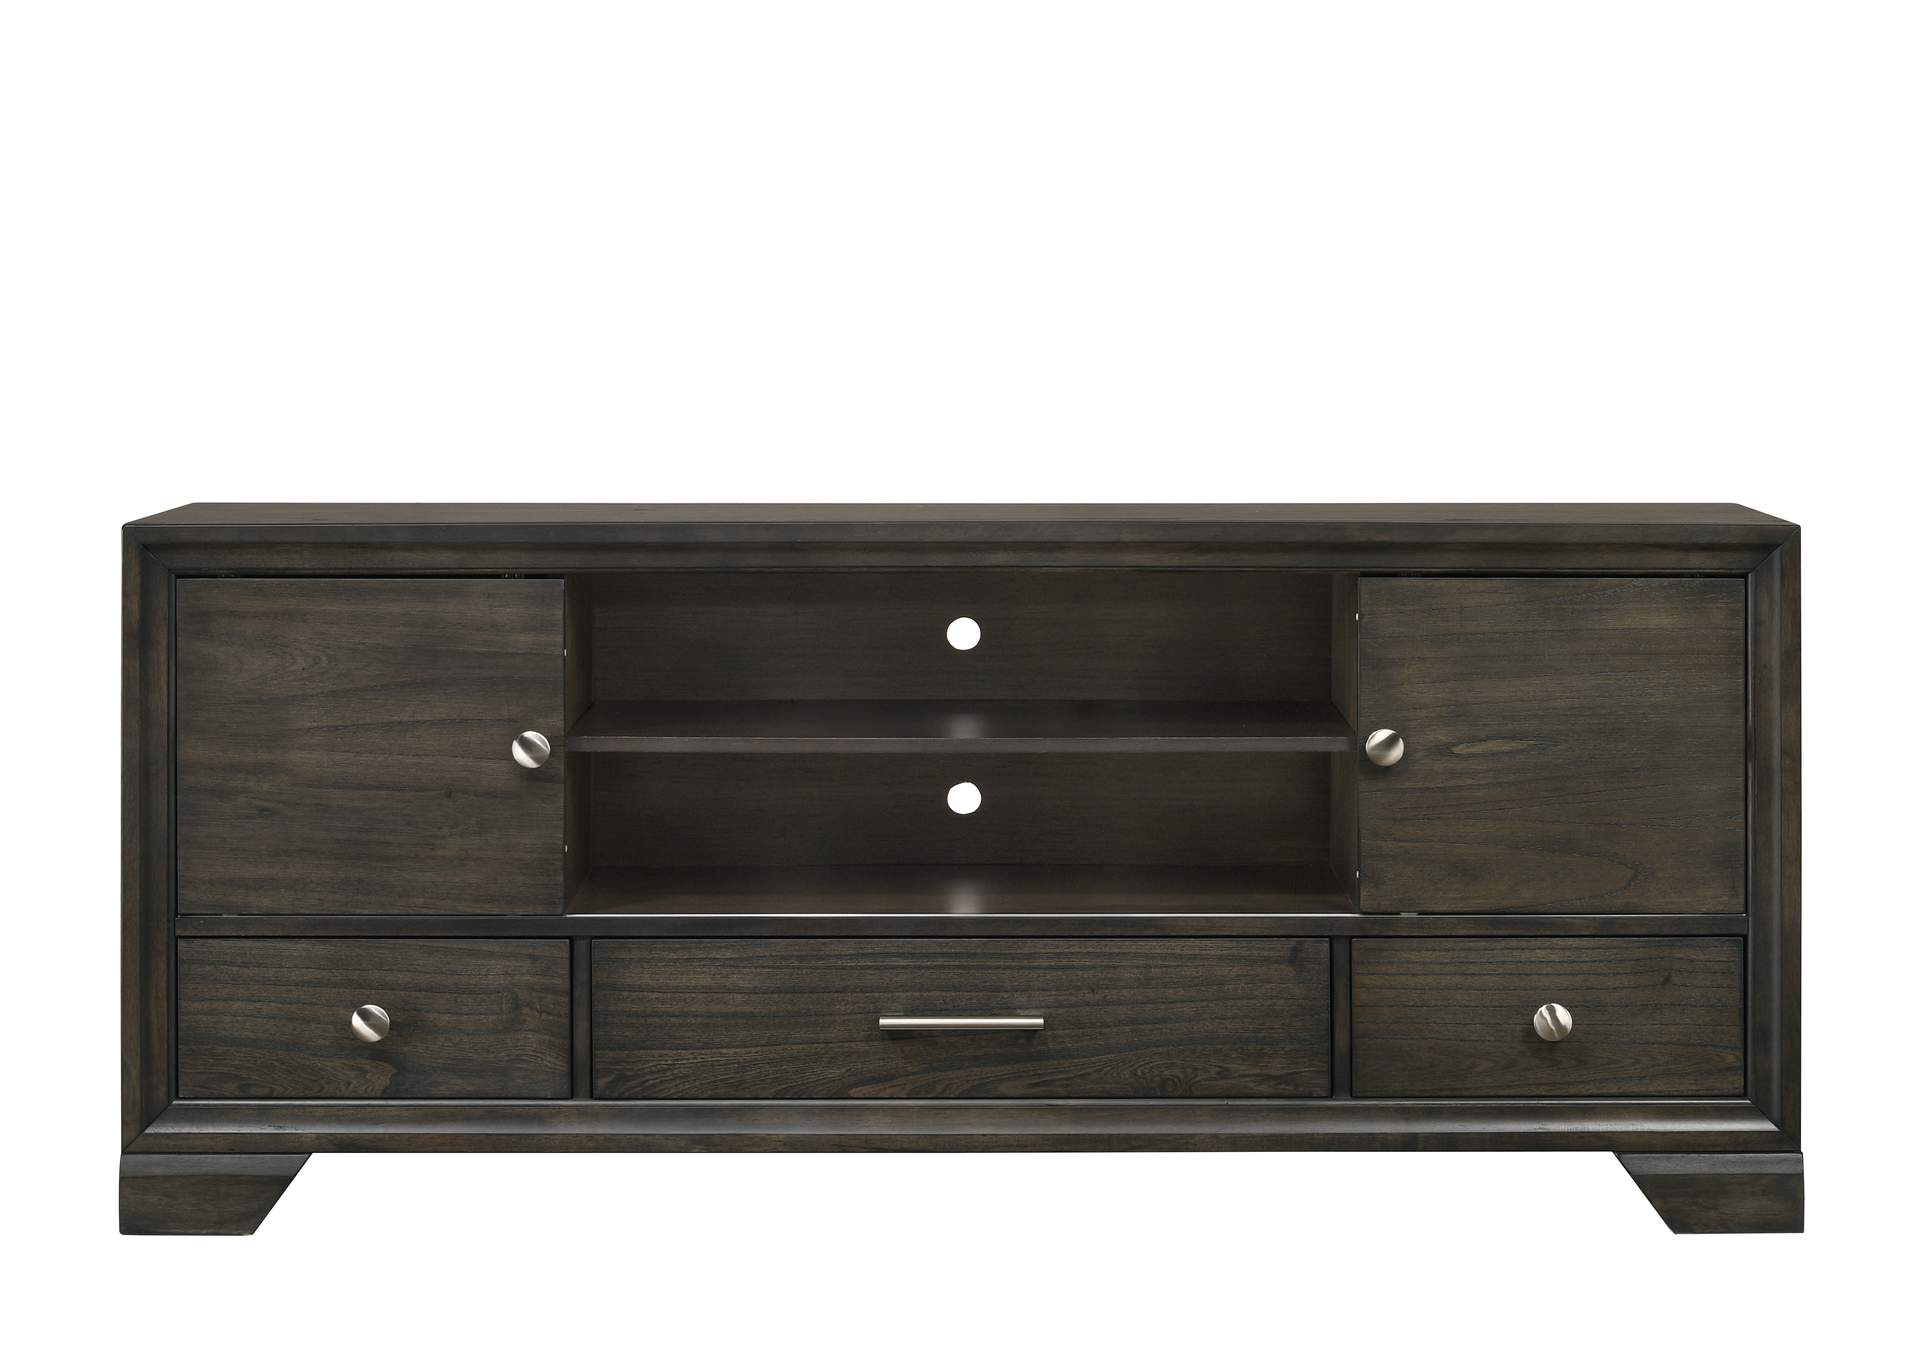 Jaymes TV Stand,Crown Mark